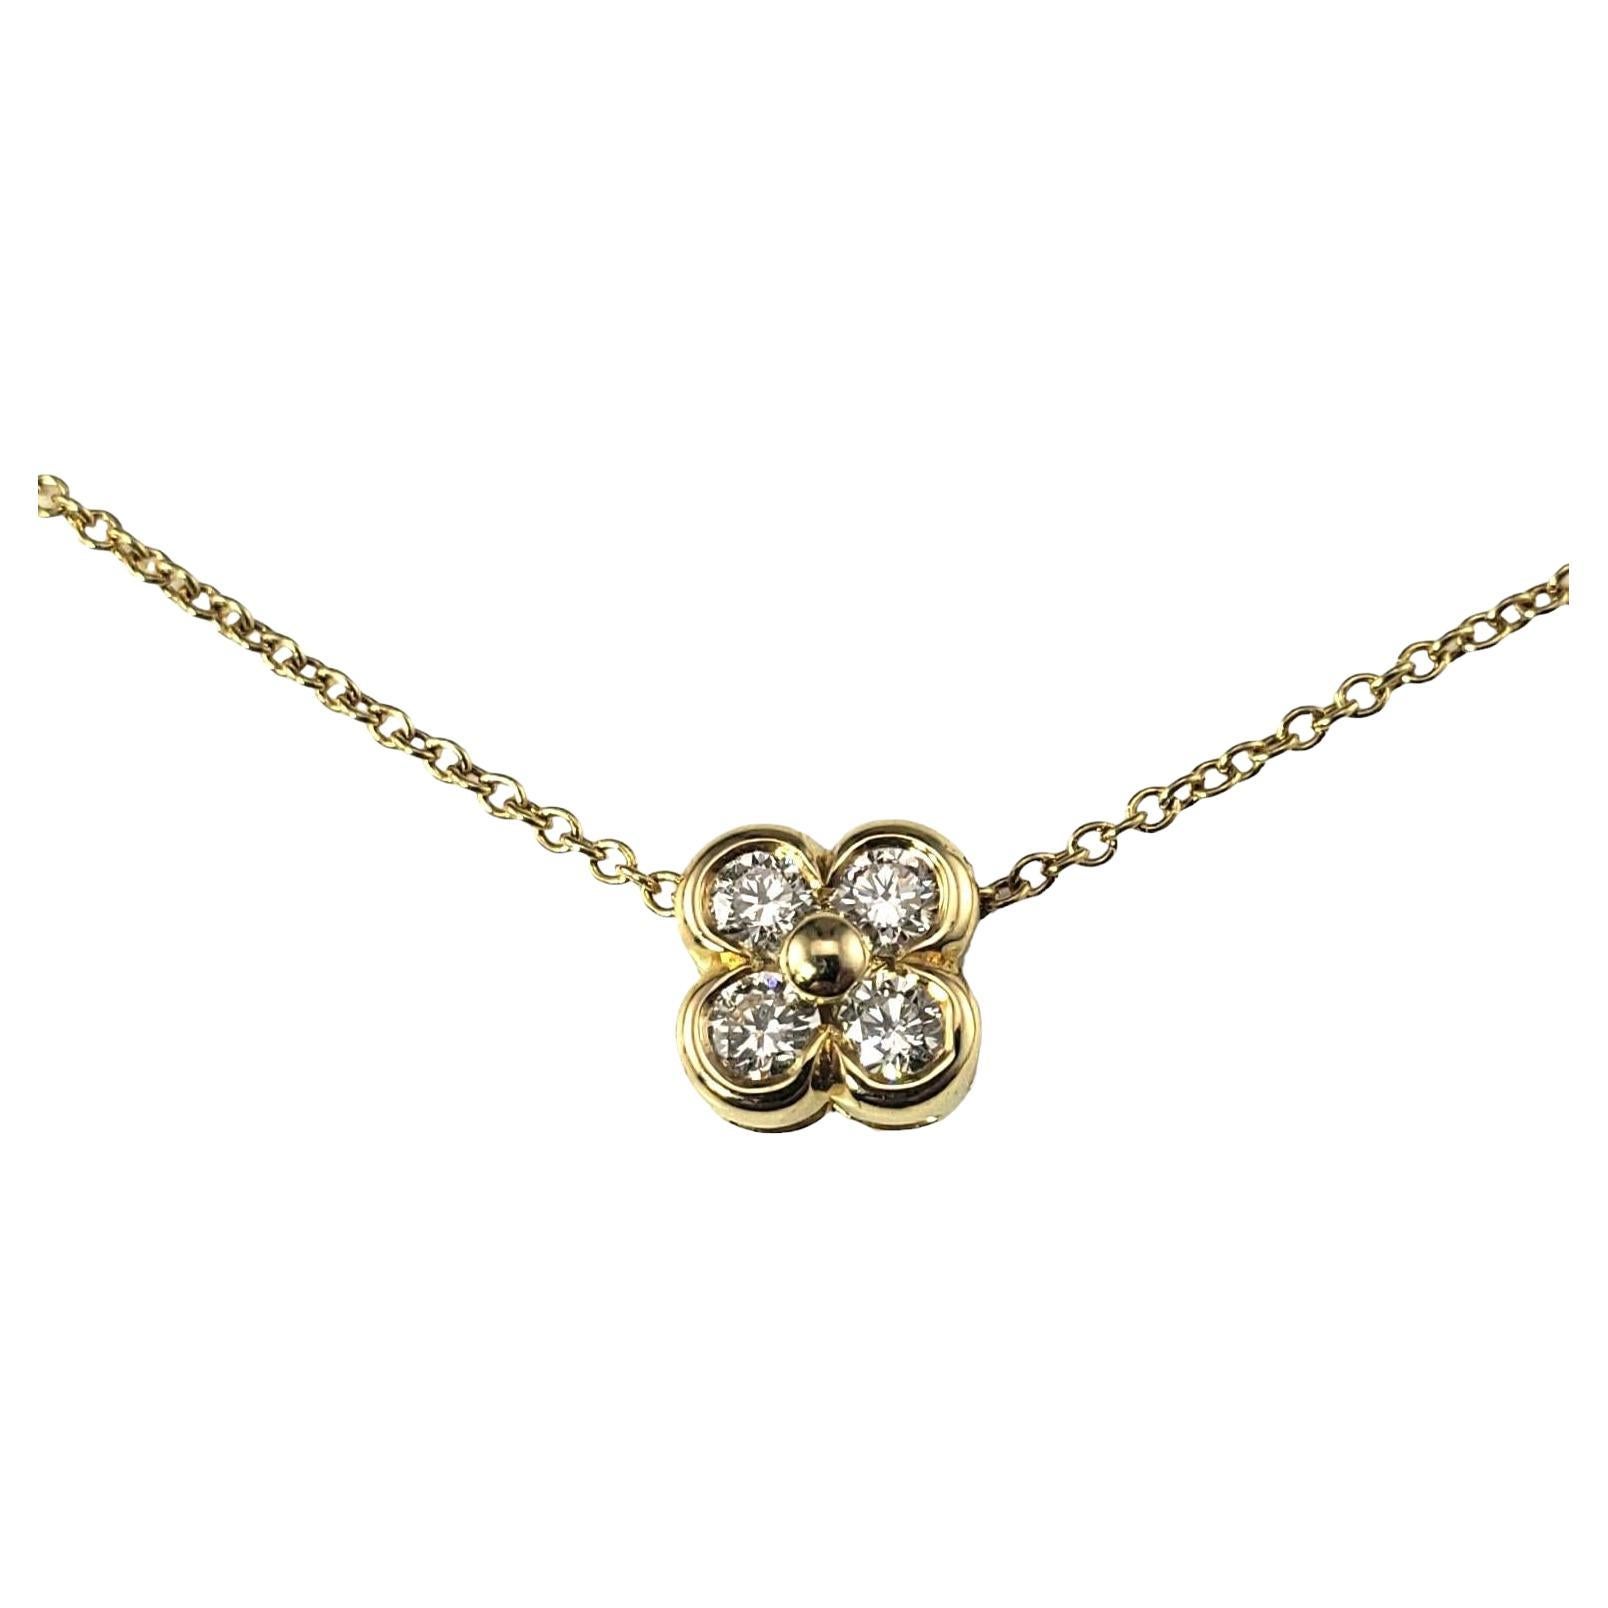 Tiffany & Co. 18 Karat Yellow Gold Diamond Flower Clover Necklace #16837 For Sale